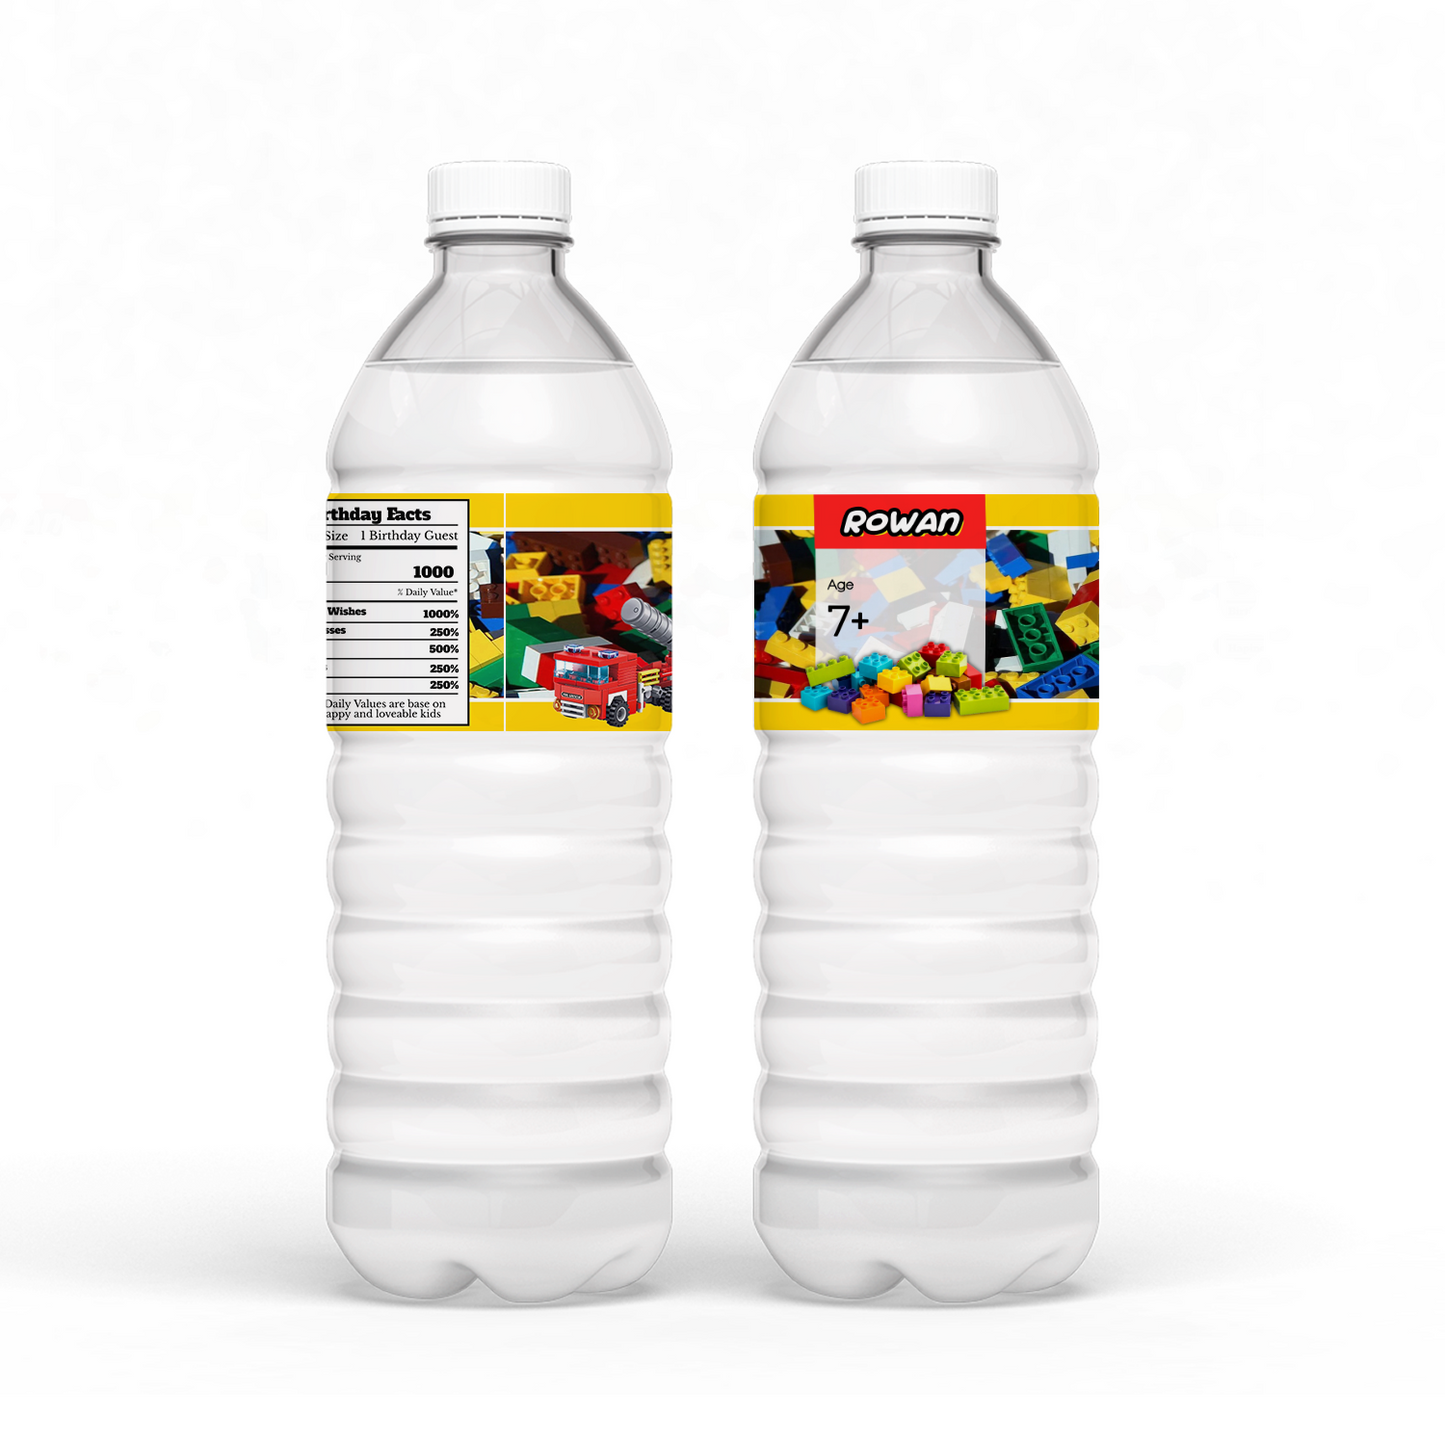 Water bottle label with a Lego theme